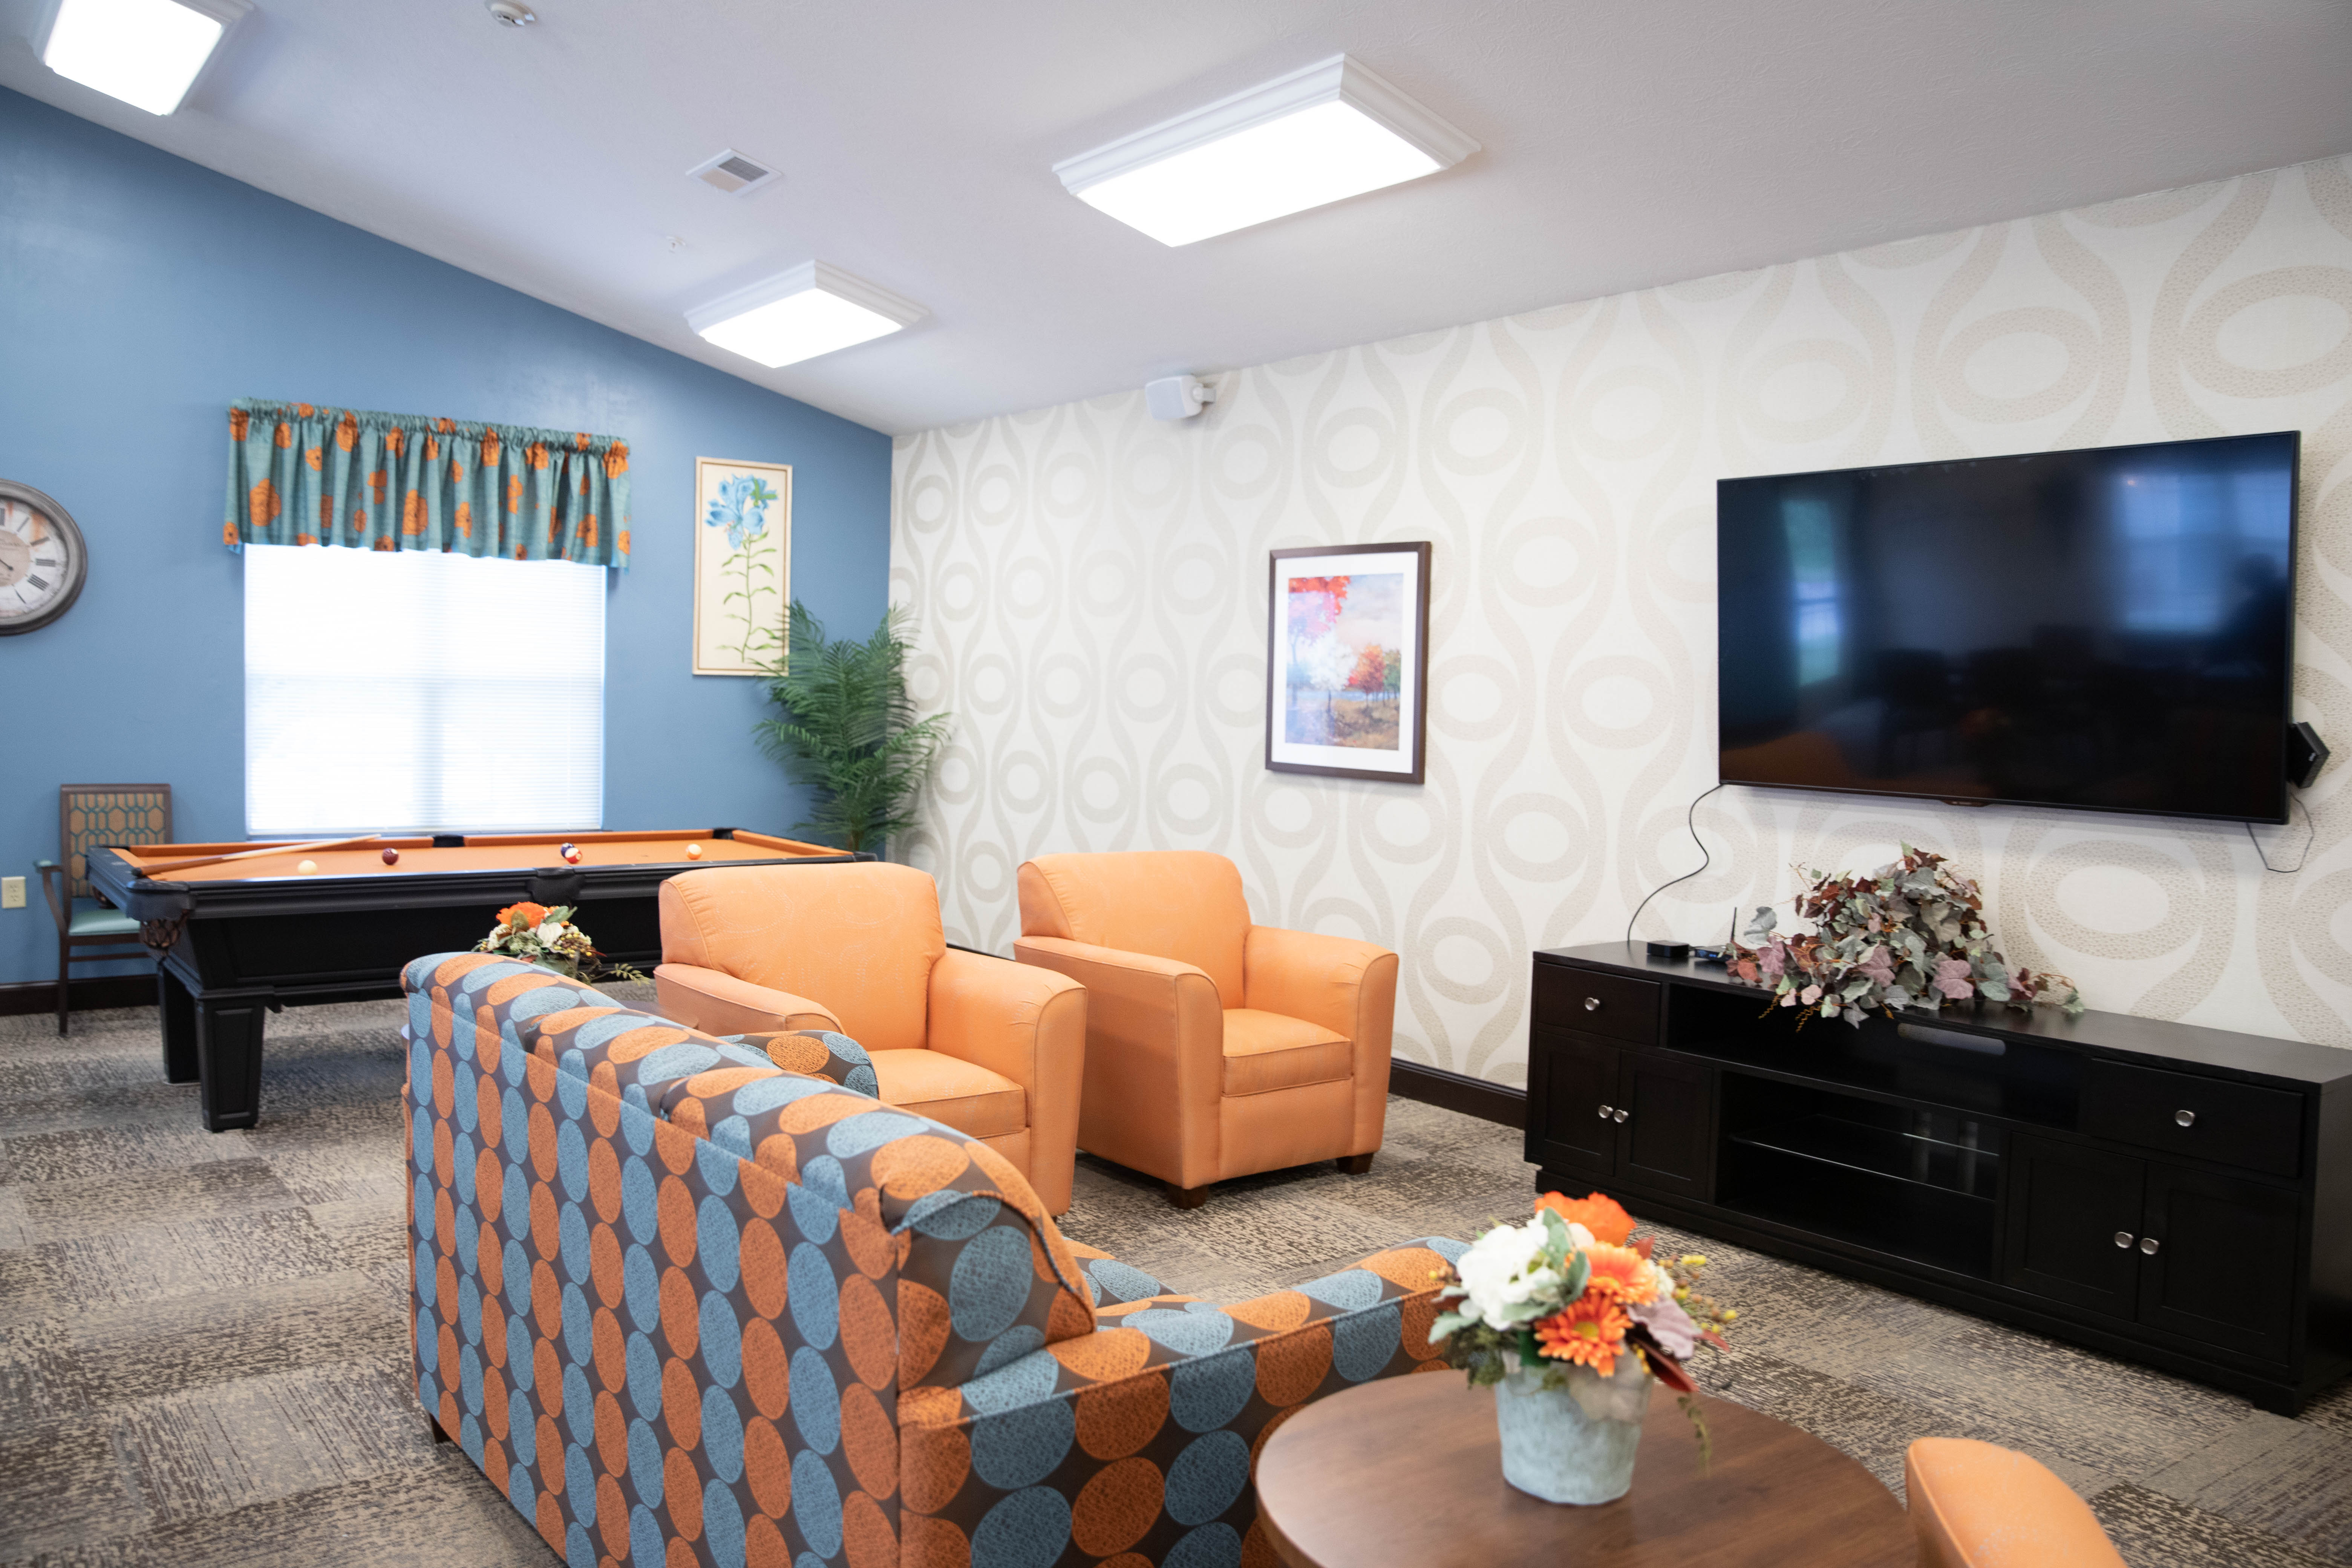 <span  class="uc_style_uc_tiles_grid_image_elementor_uc_items_attribute_title" style="color:#000000;">Aster Place Media Room with seating, tv and pool table</span>